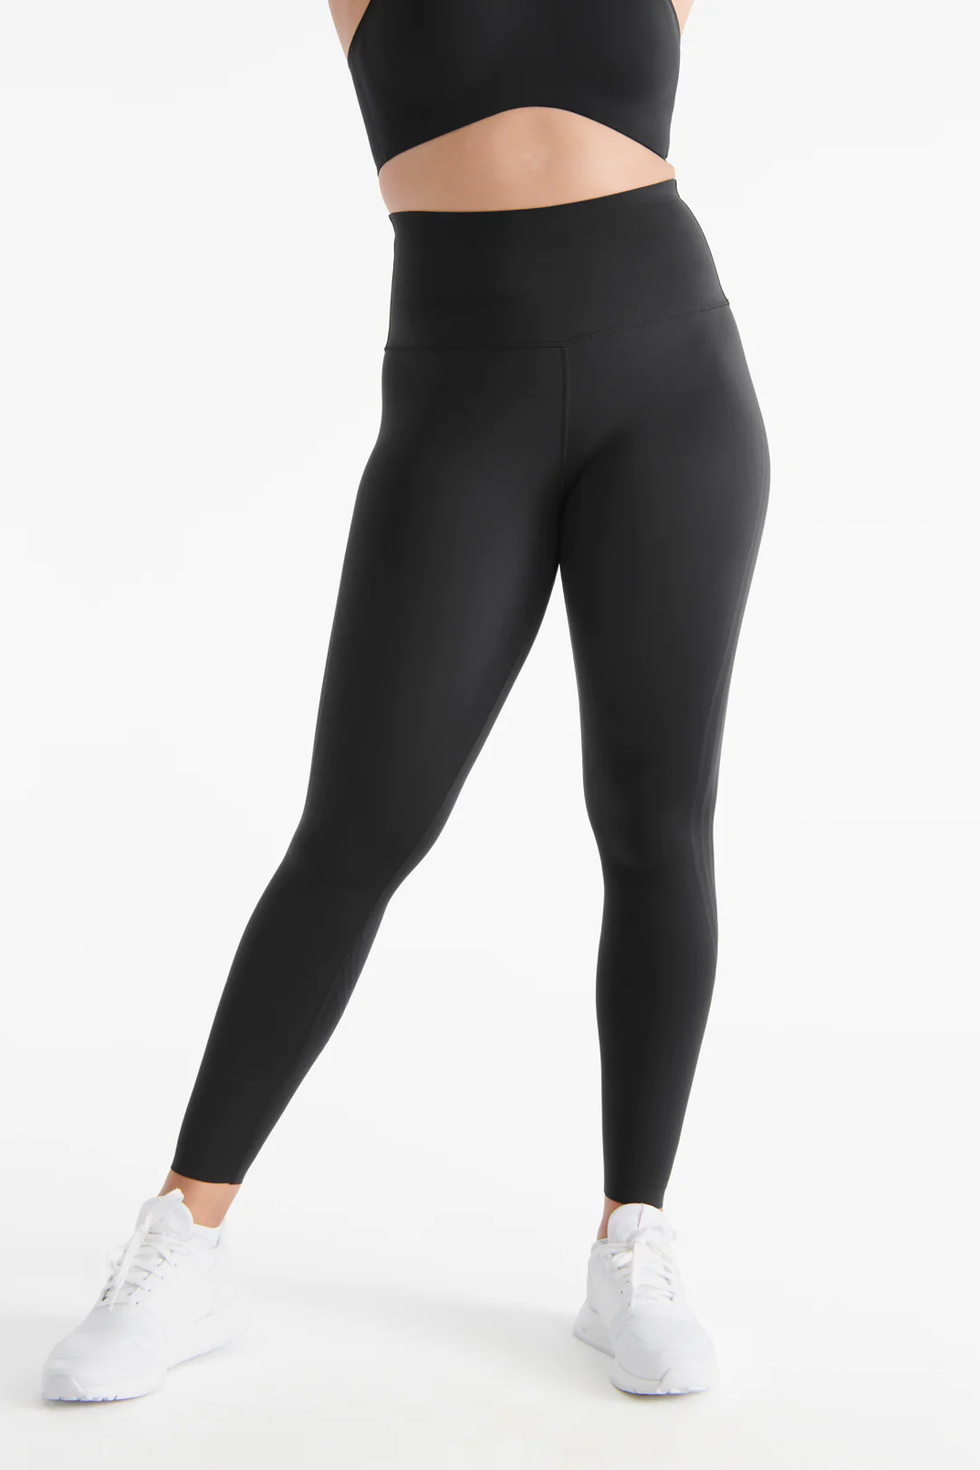 COPY - Fabletics High-Waisted Seamless Stripe Leggings Size Medium in 2023